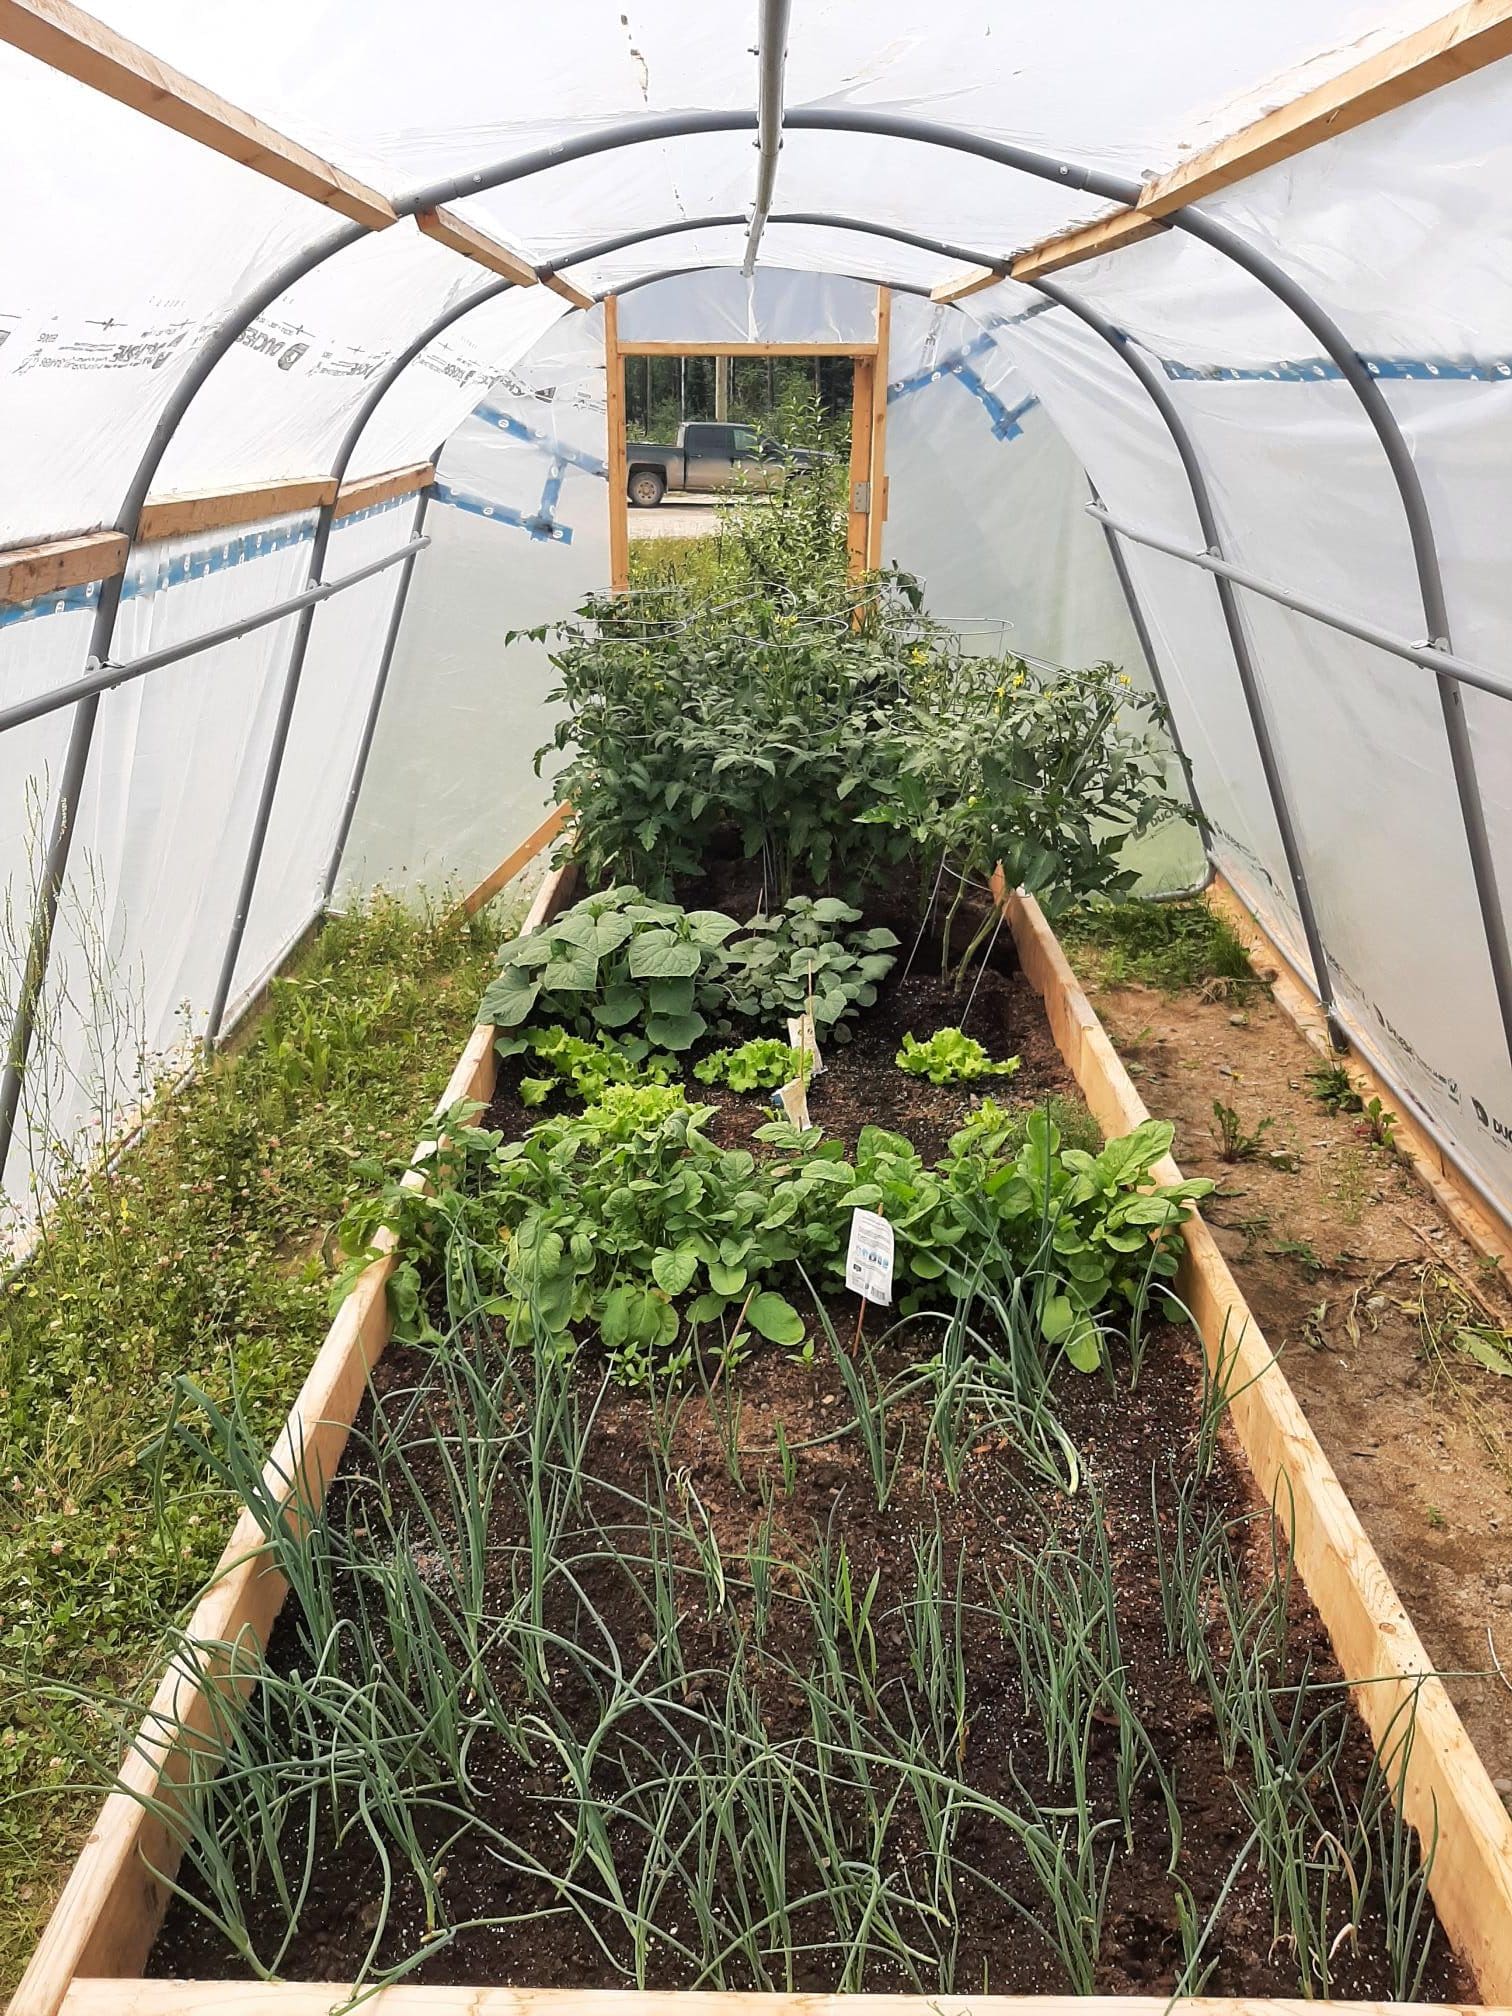 The inside of a greenhouse with vegetables growing in it.